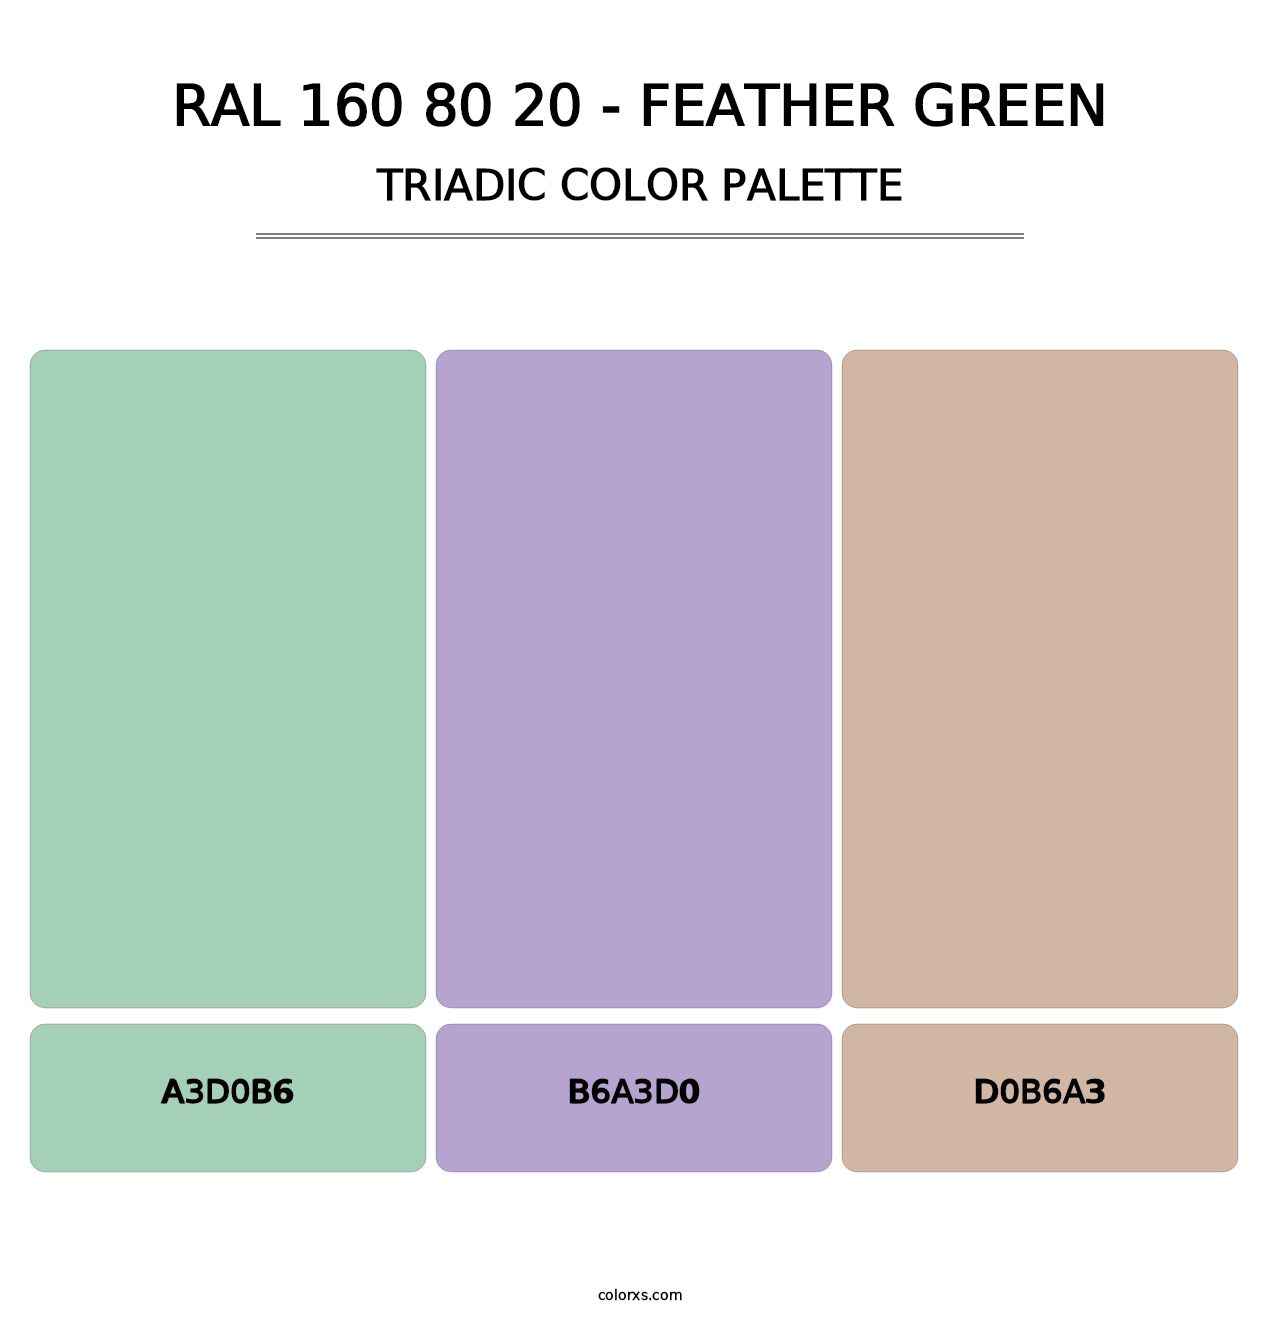 RAL 160 80 20 - Feather Green - Triadic Color Palette